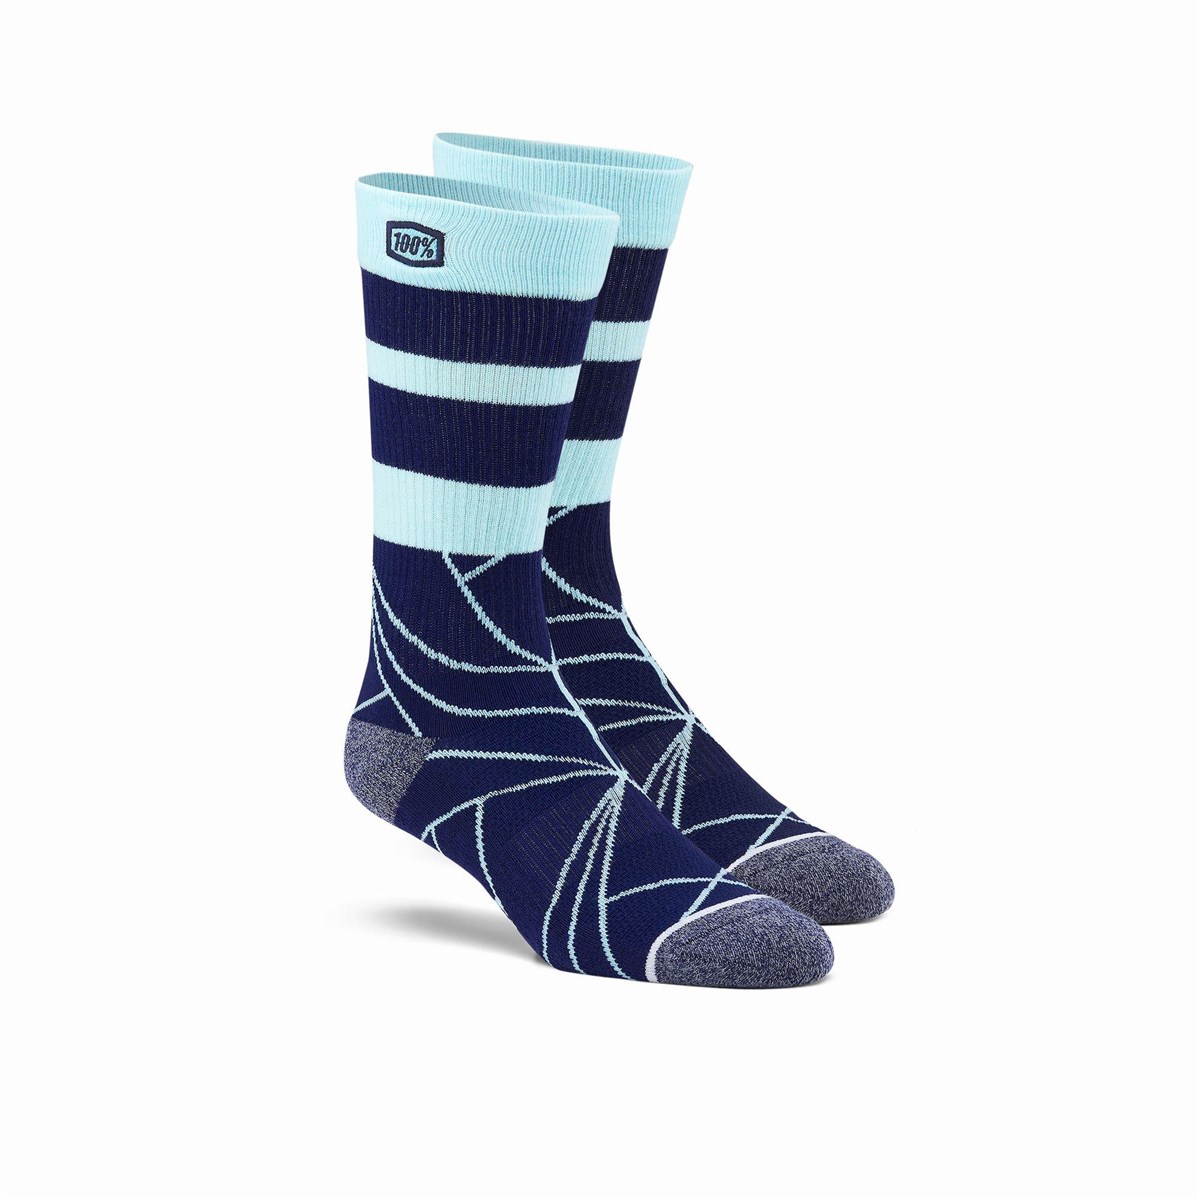 100% Fracture Athletic Socks product image